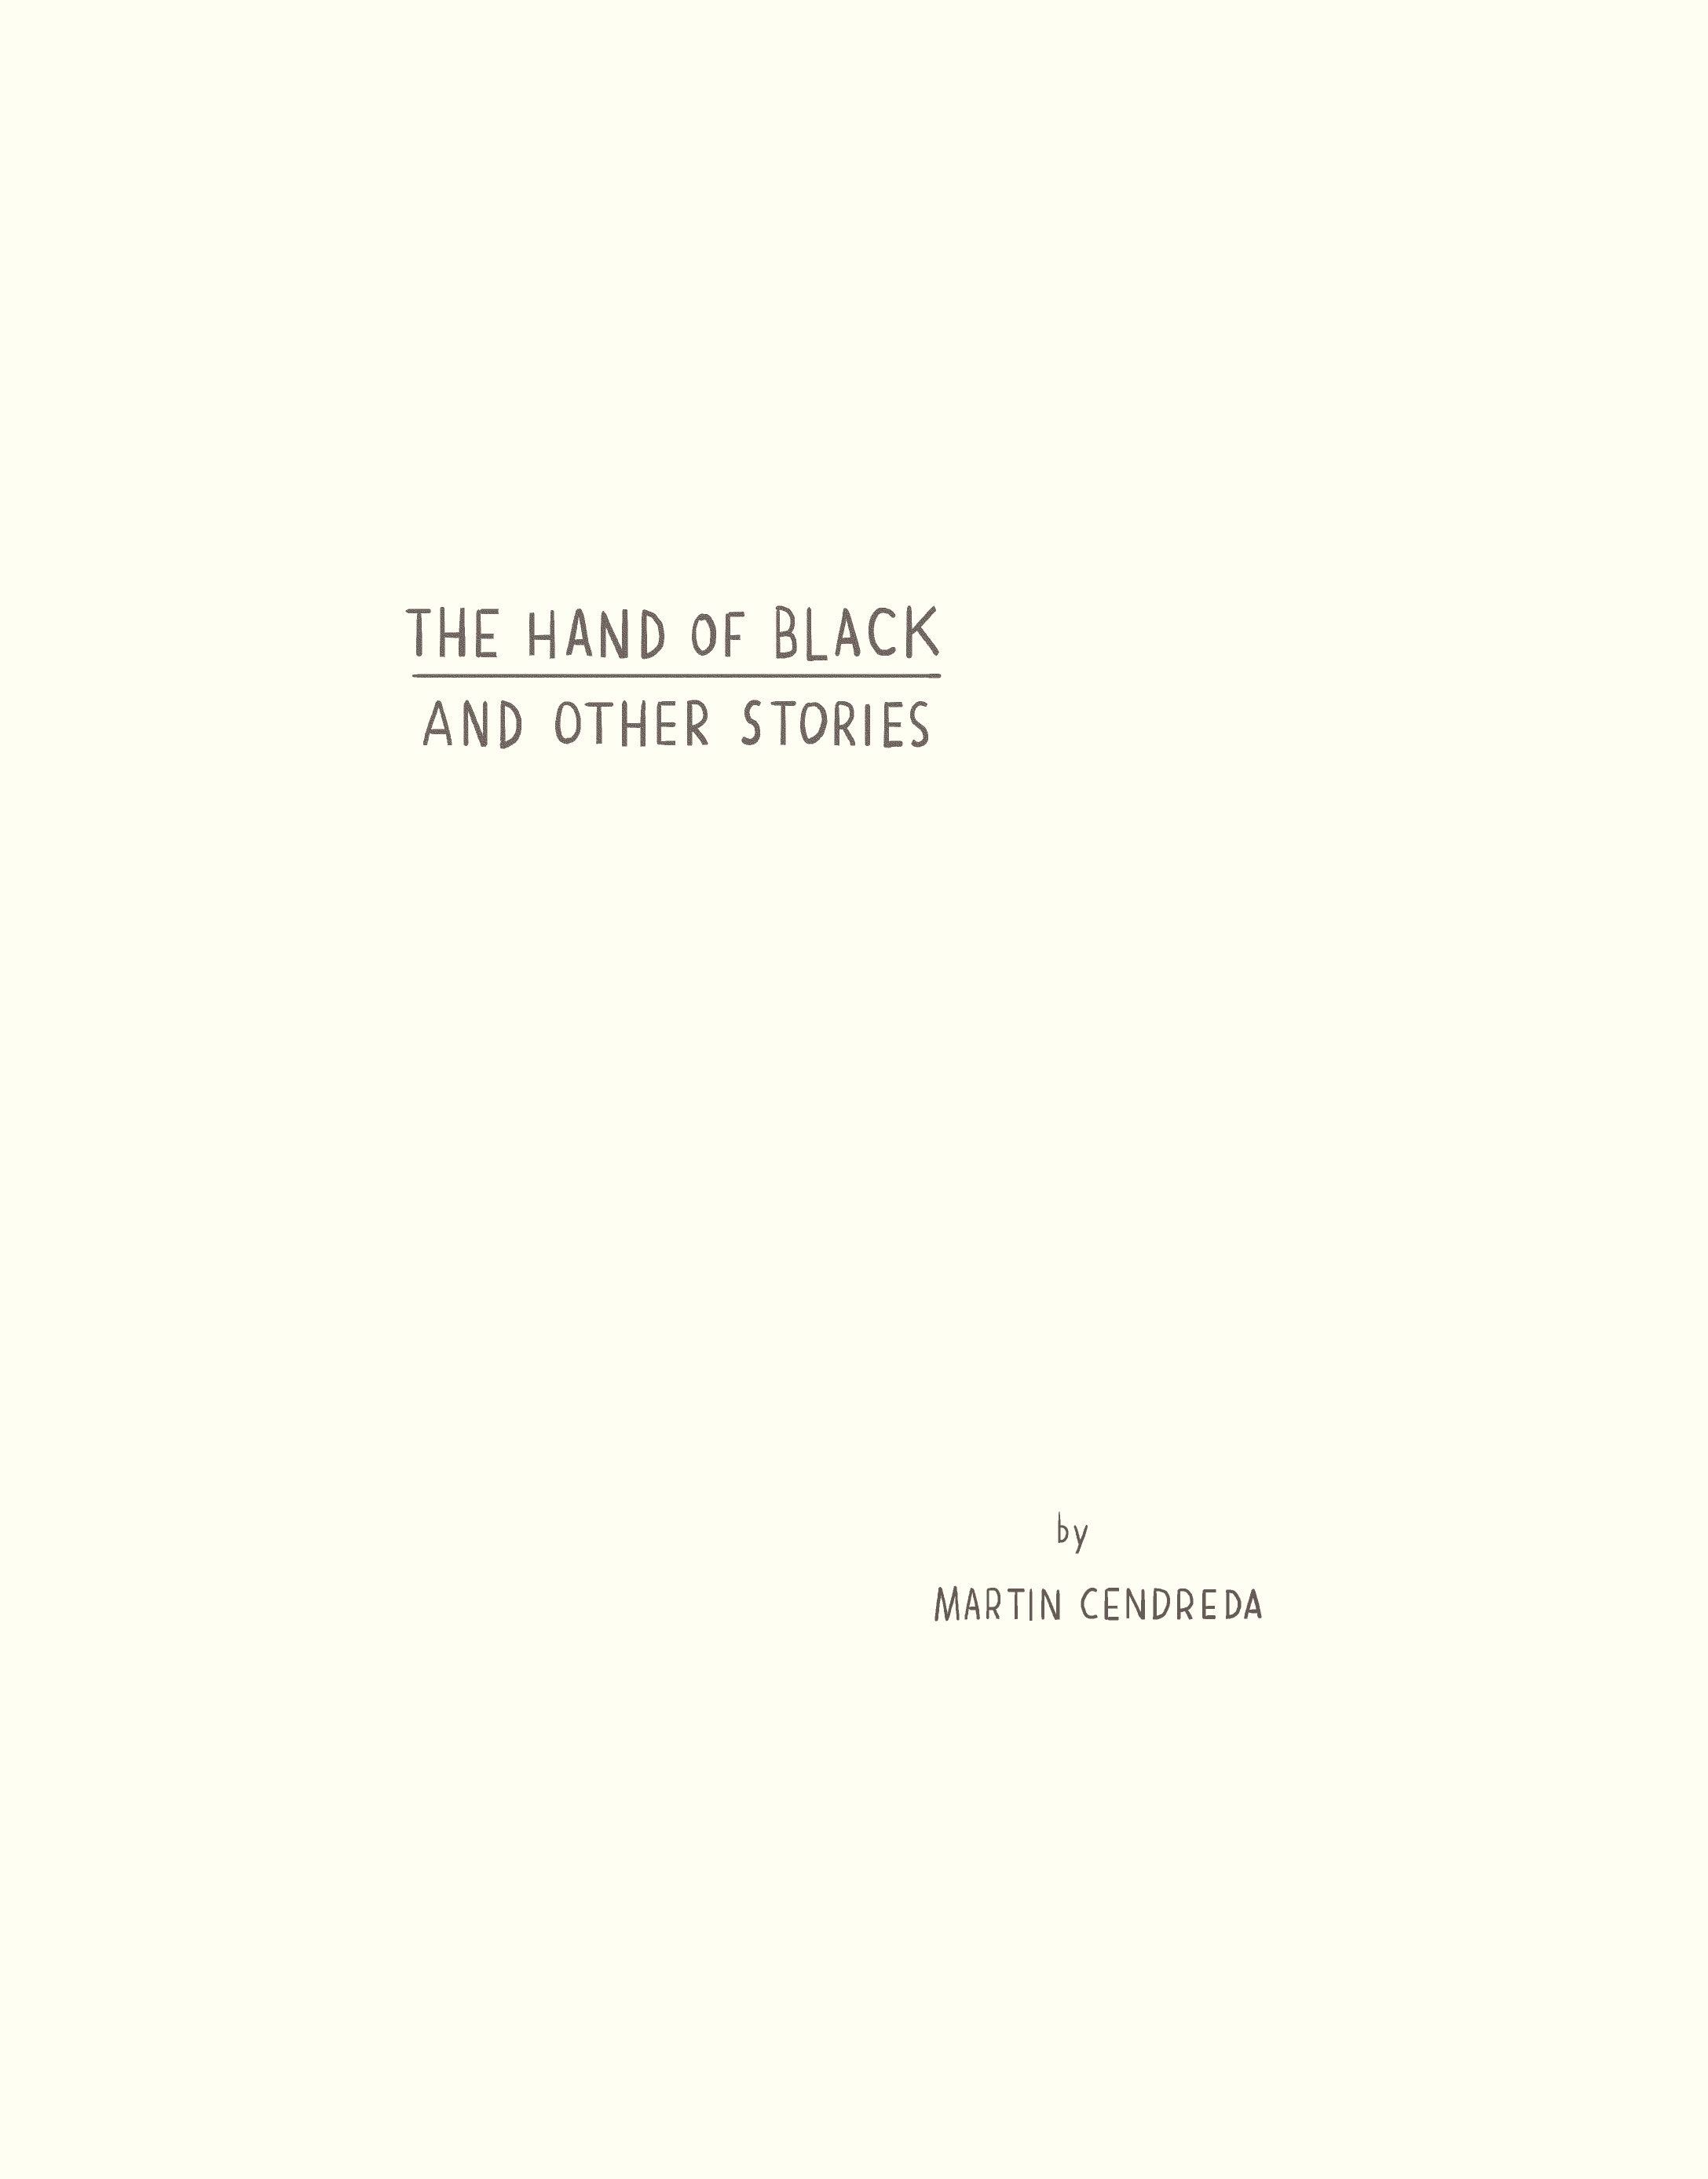 Read online The Hand of Black and Other Stories comic -  Issue # TPB - 4